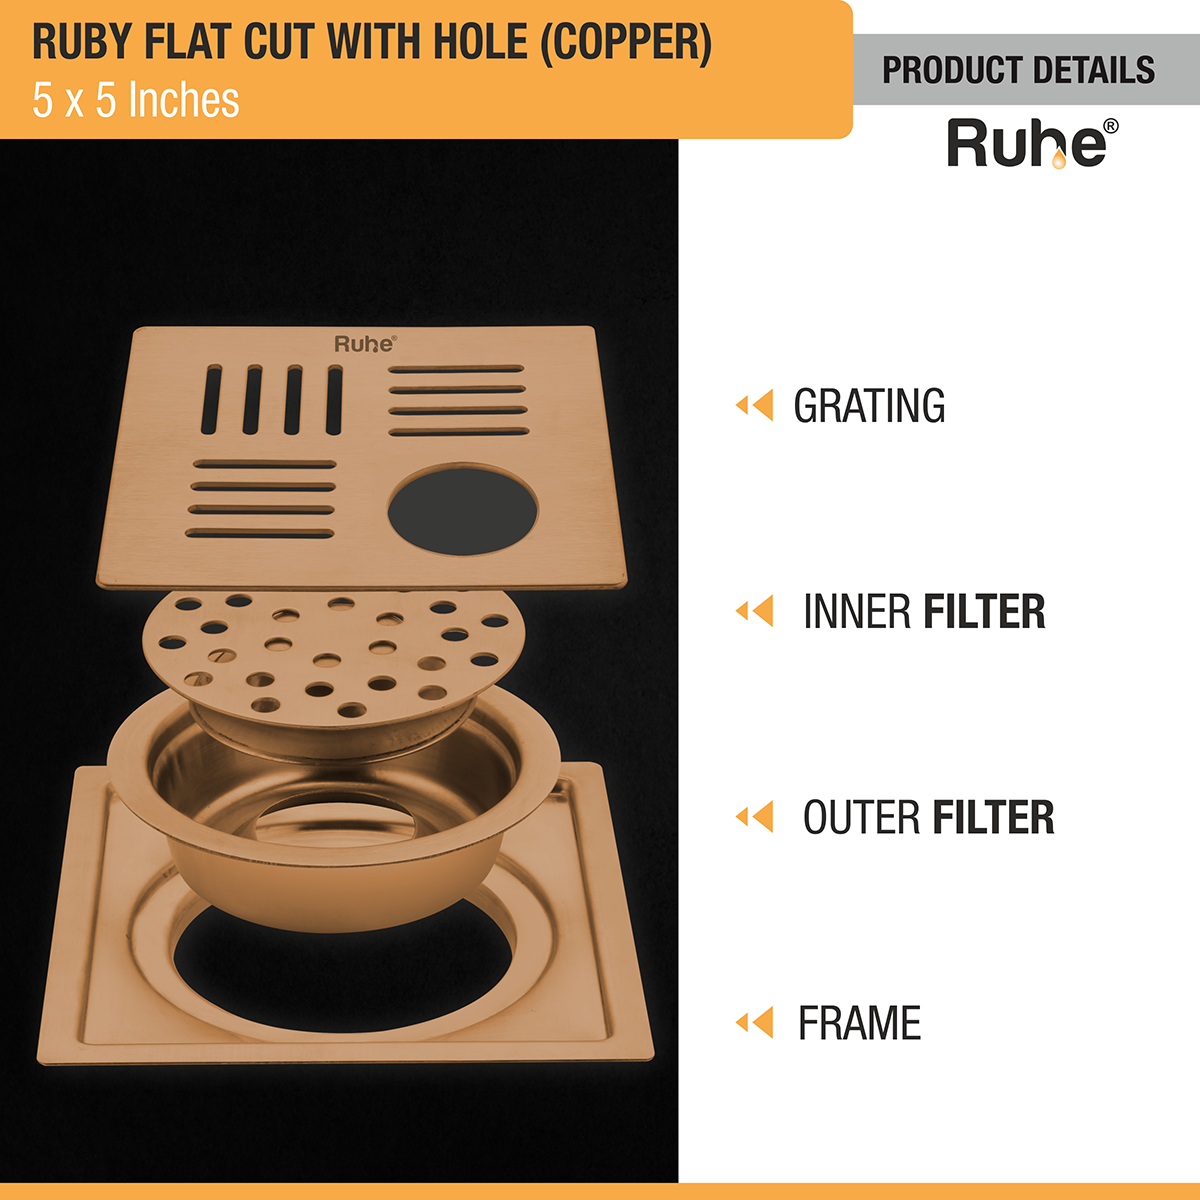 Ruby Square Flat Cut Floor Drain in Antique Copper PVD Coating (5 x 5 Inches) with Hole product details